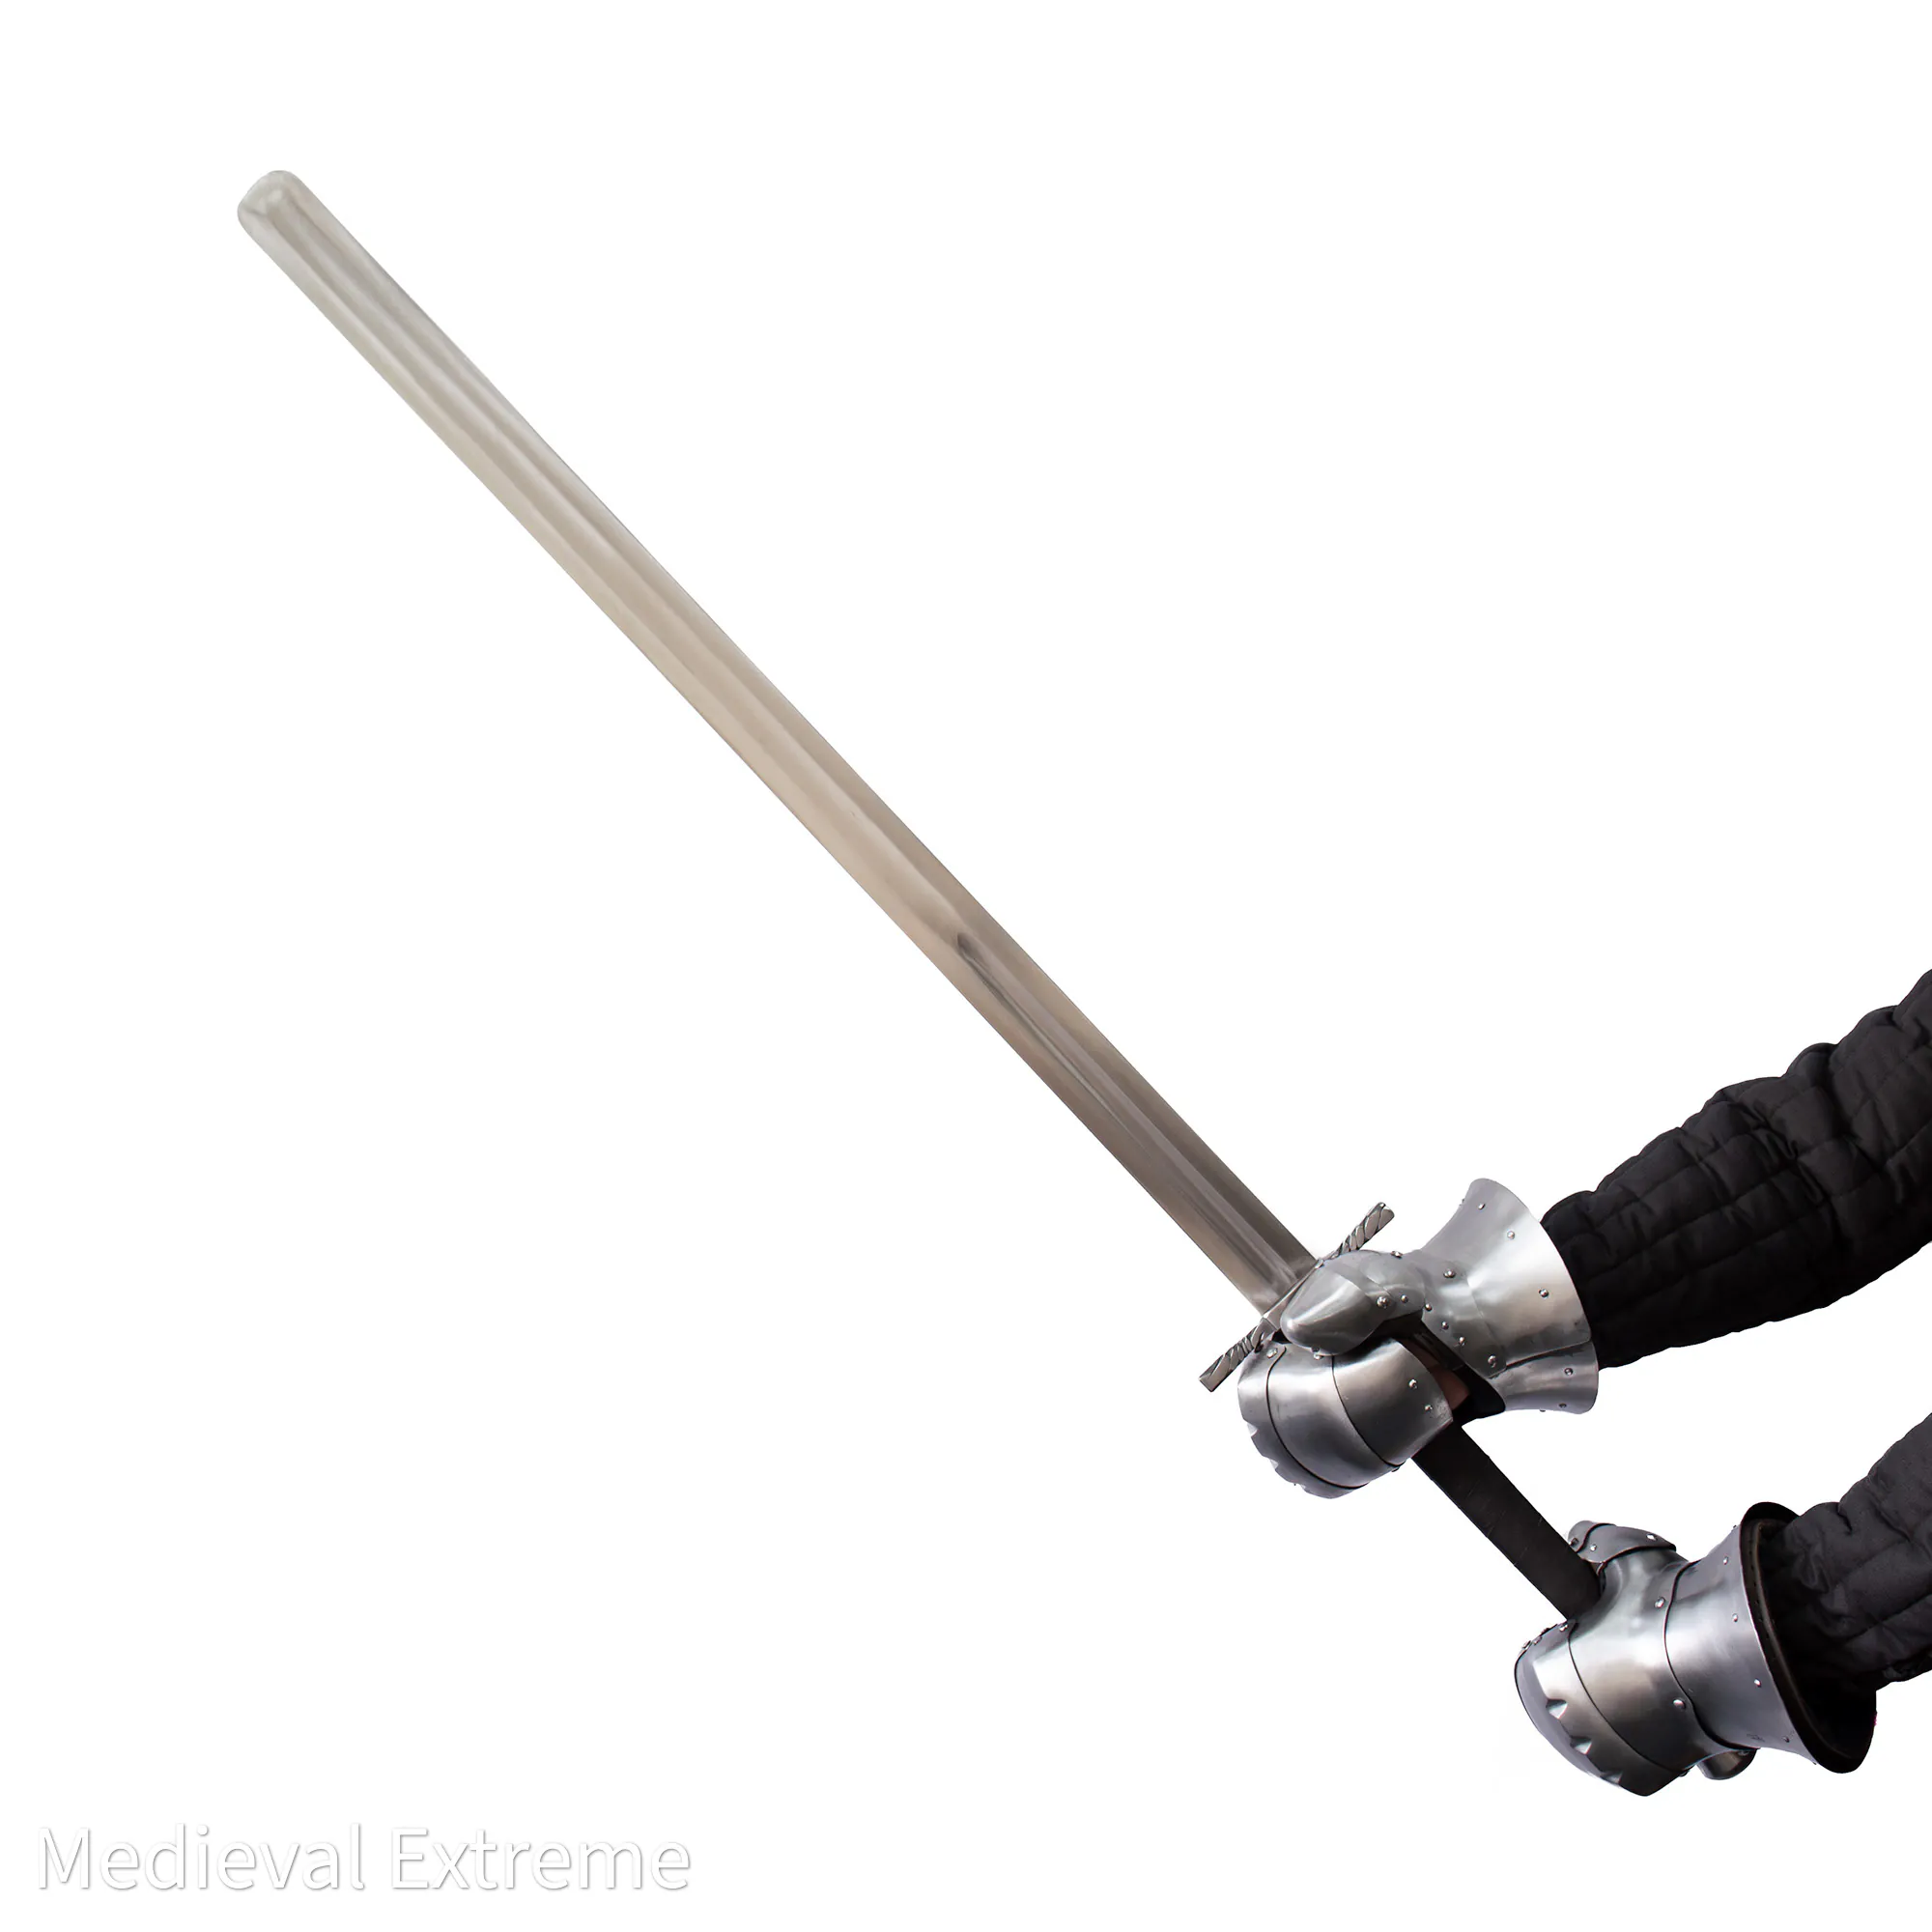 Executioner's sword for armored combat in hands